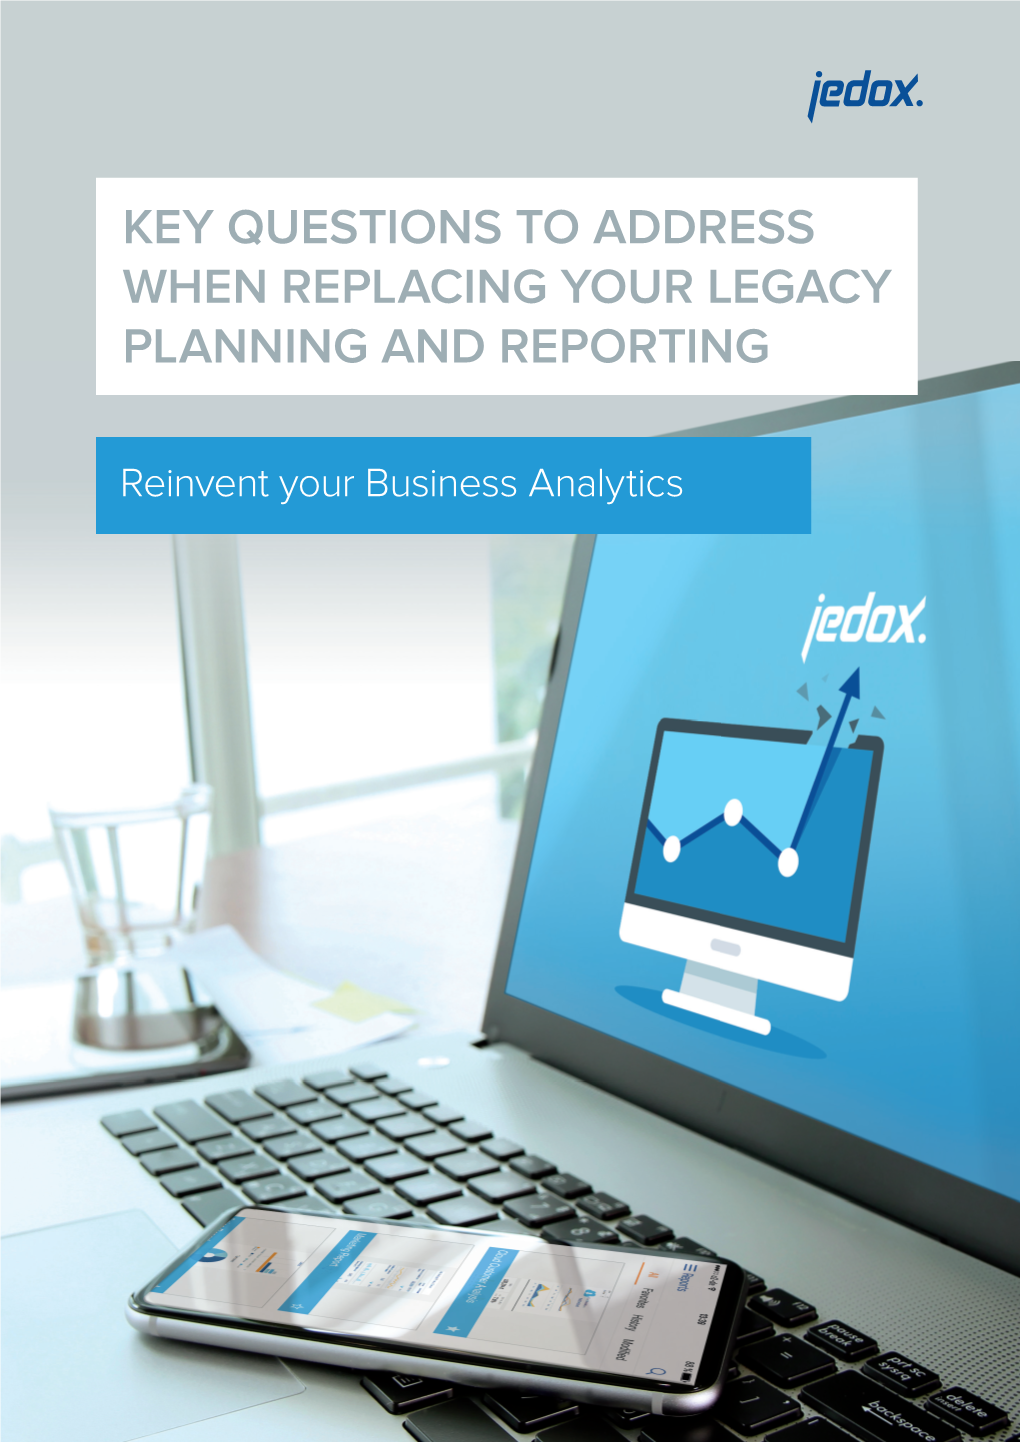 Key Questions to Address When Replacing Your Legacy Planning and Reporting